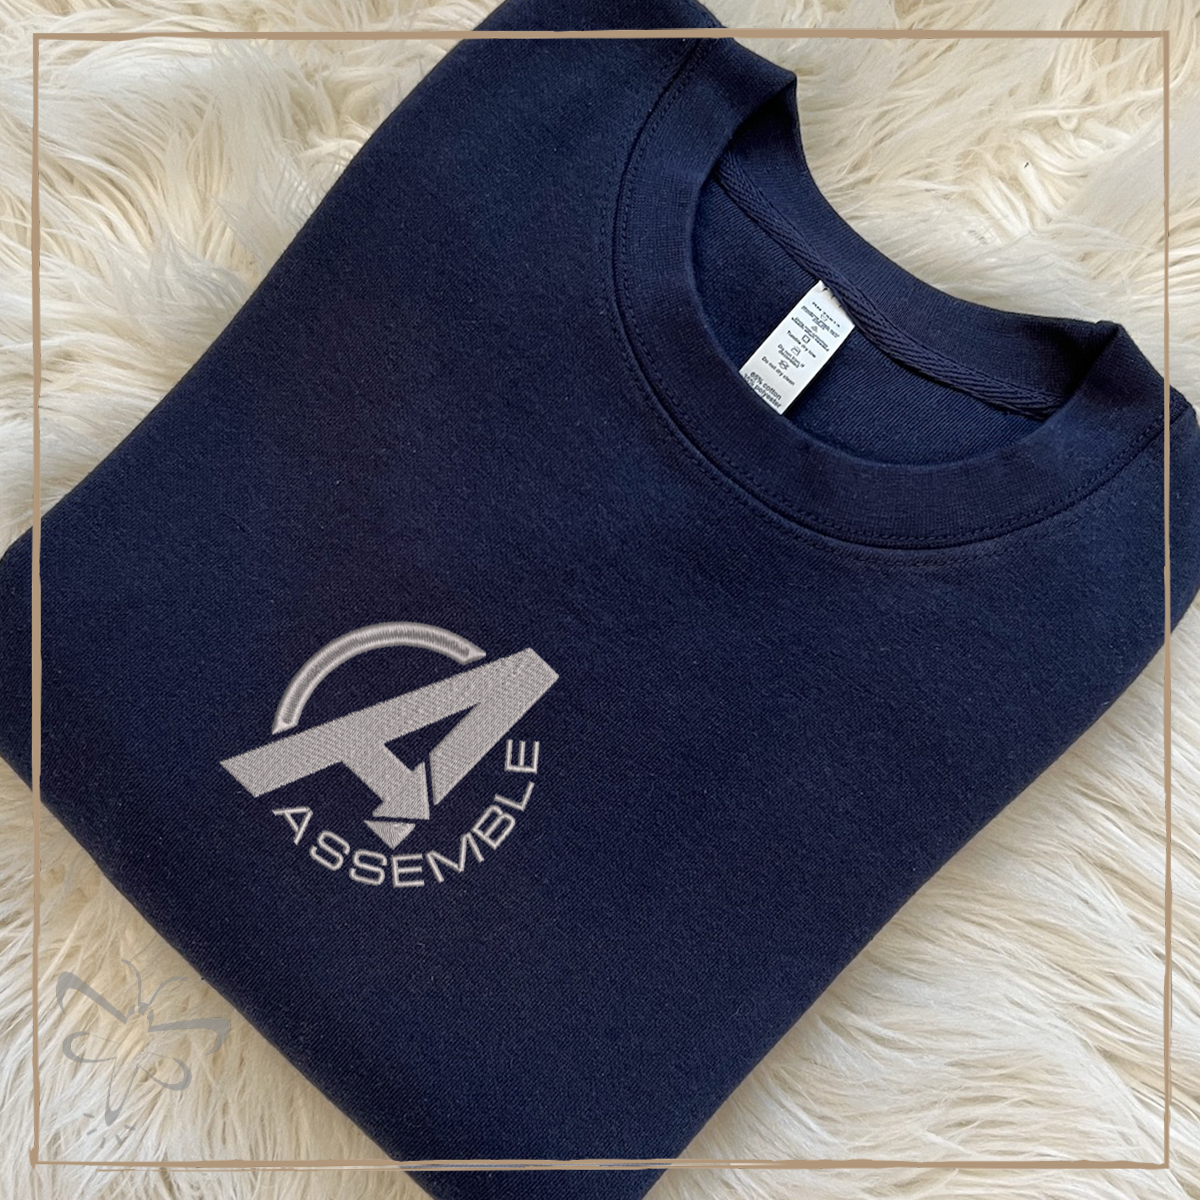 Assemble Embroidered Crewneck Xs / Navy Sweater